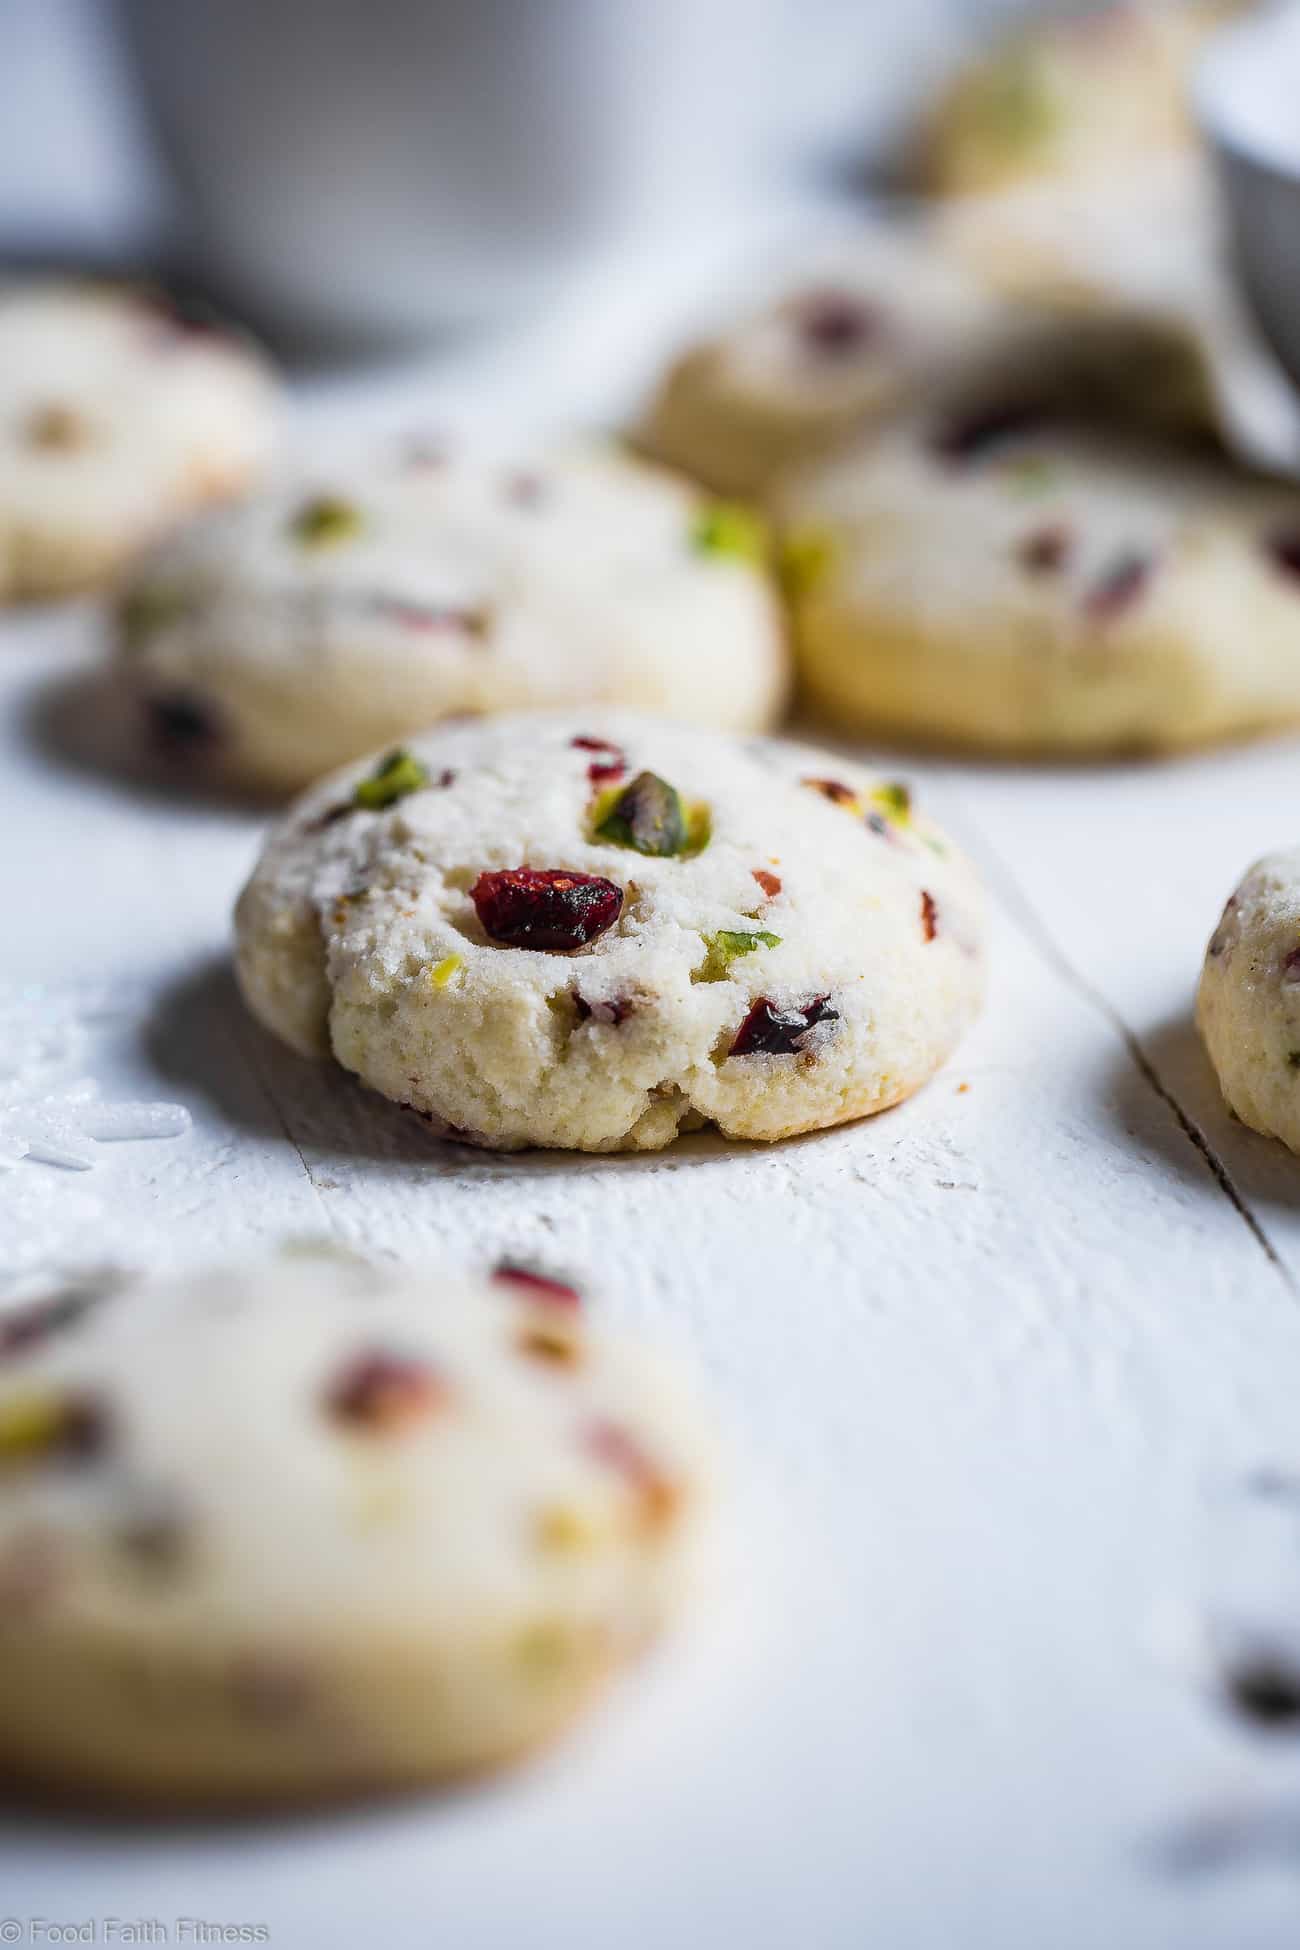 Gluten Free Sugar Free Sugar Cookies - These quick and easy, CHEWY sugarless cookies have tangy and crunchy cranberries and pistachios! They're a healthier Christmas treat for only 95 calories! | Foodfaithfitness.com | @FoodFaithFit